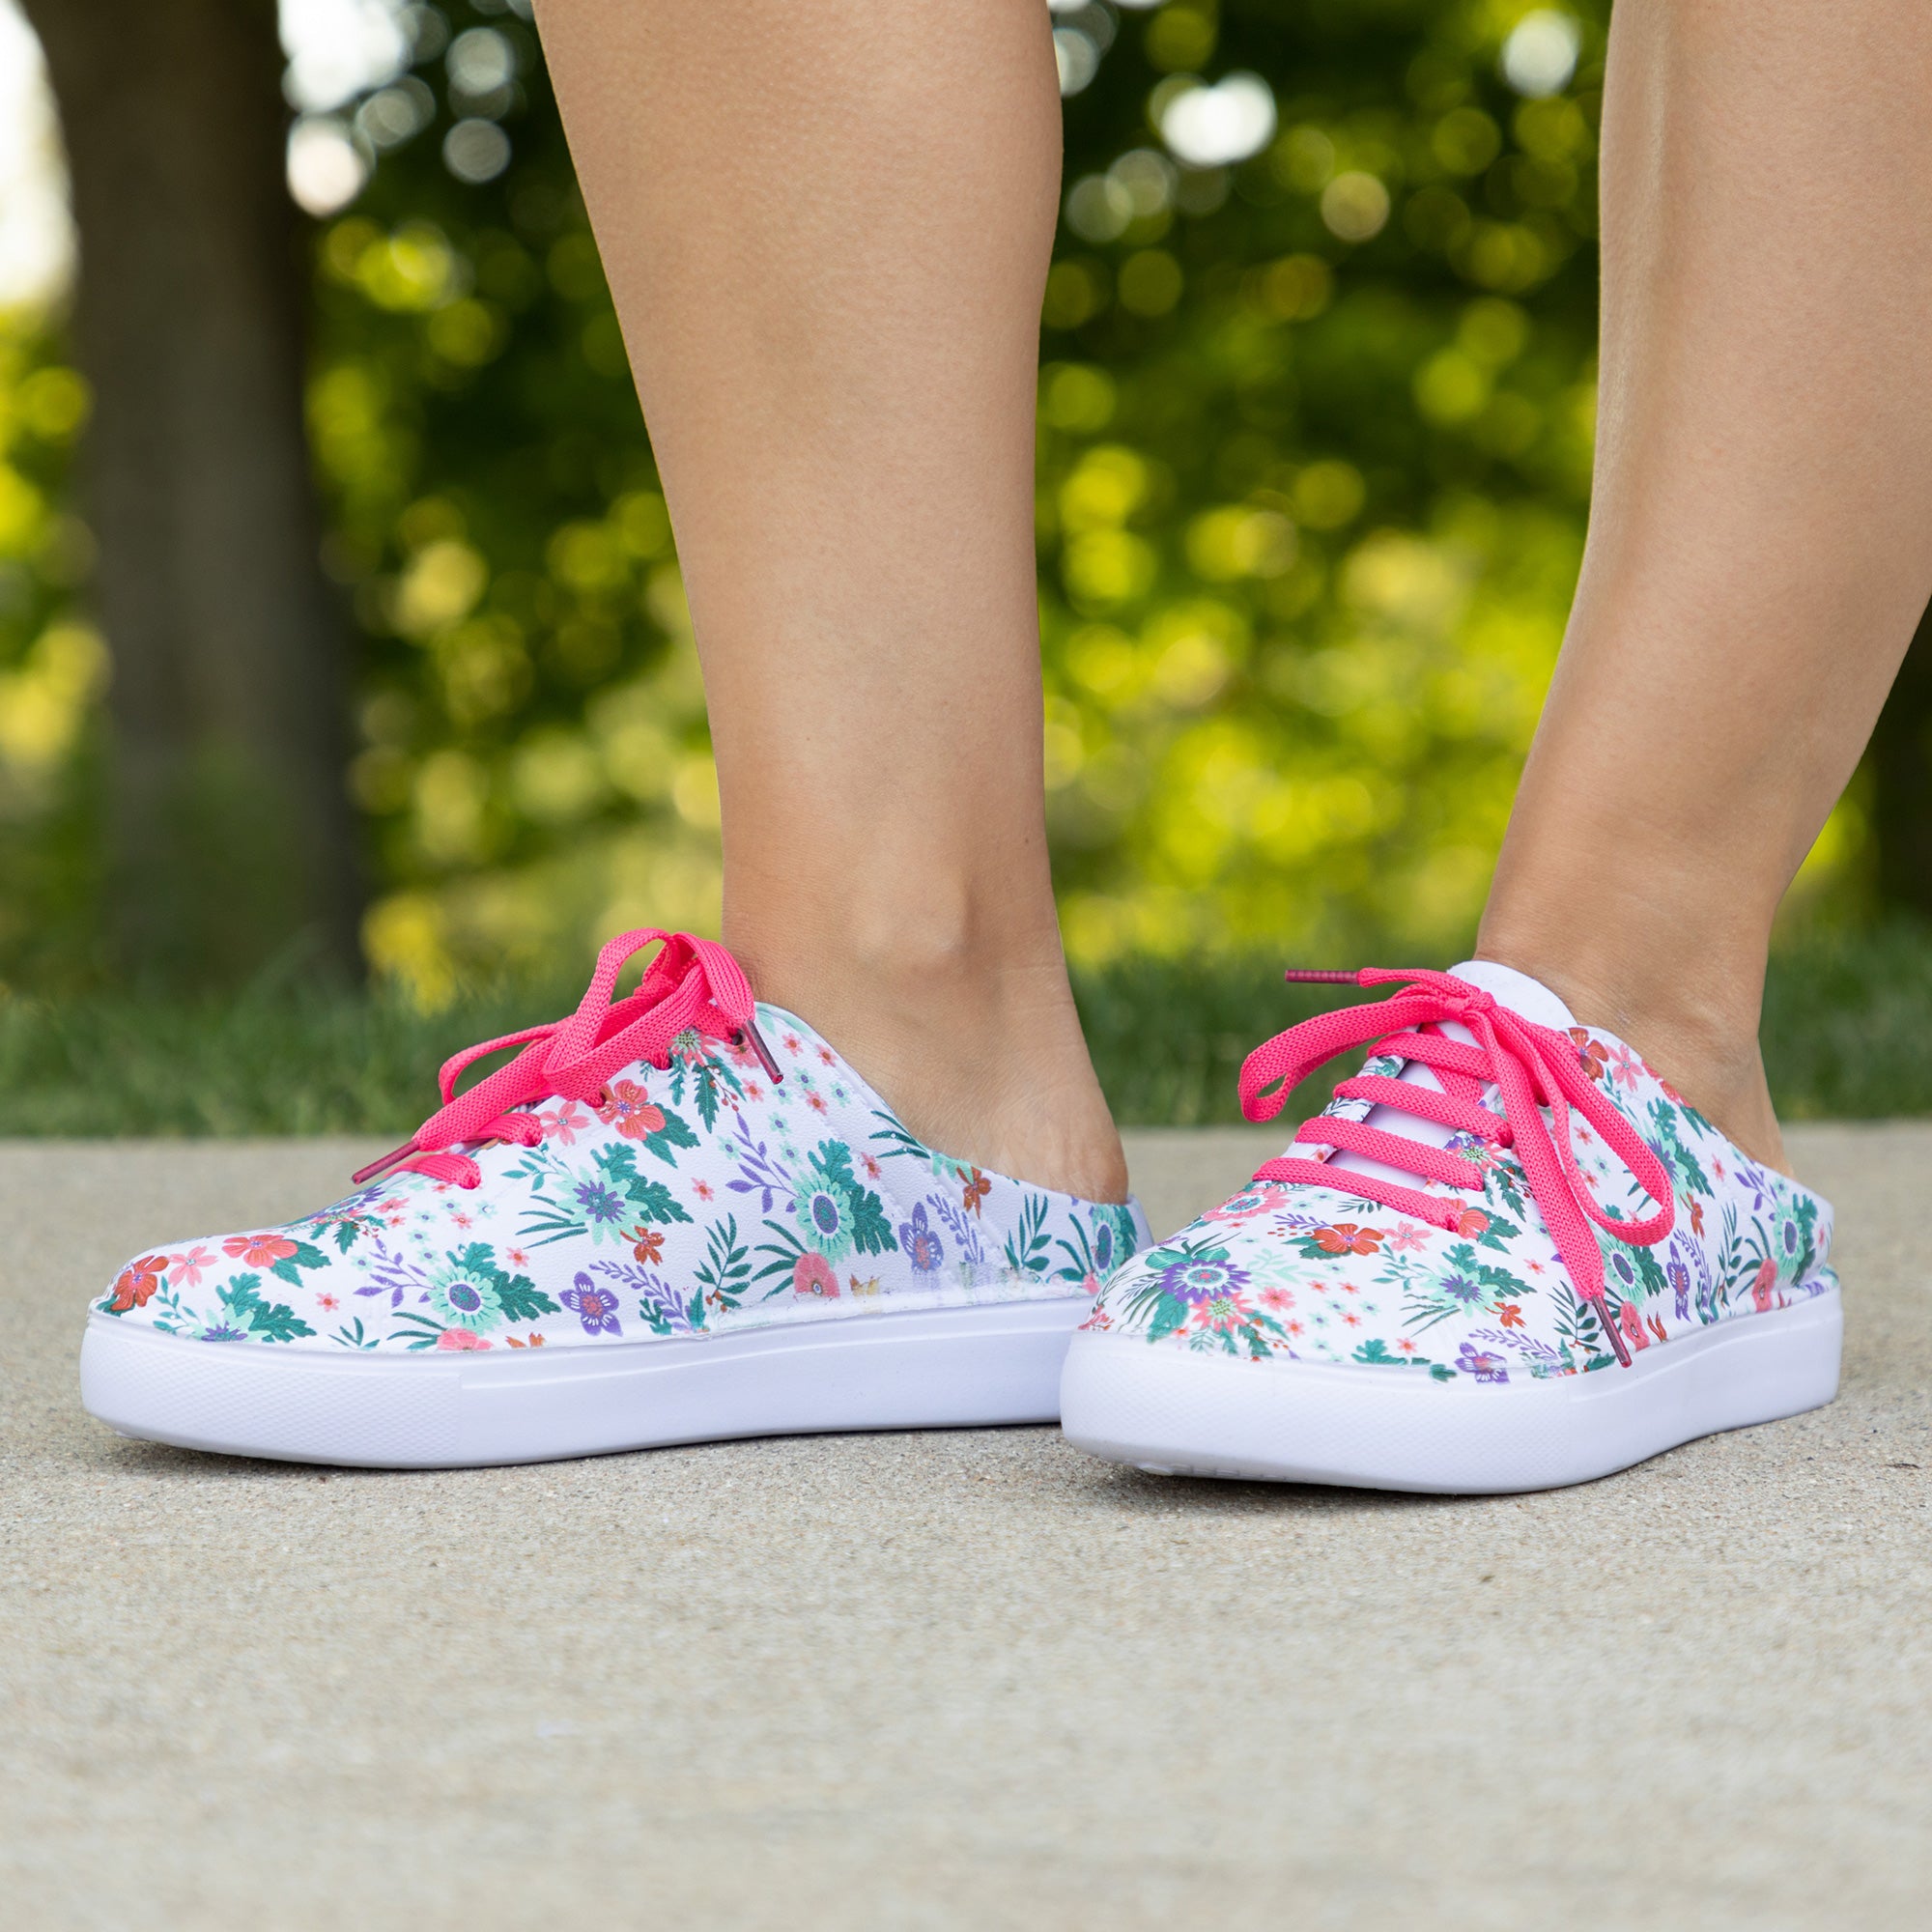 Women's Paw Print Lace-Up Mule Sneakers - Floral - 7